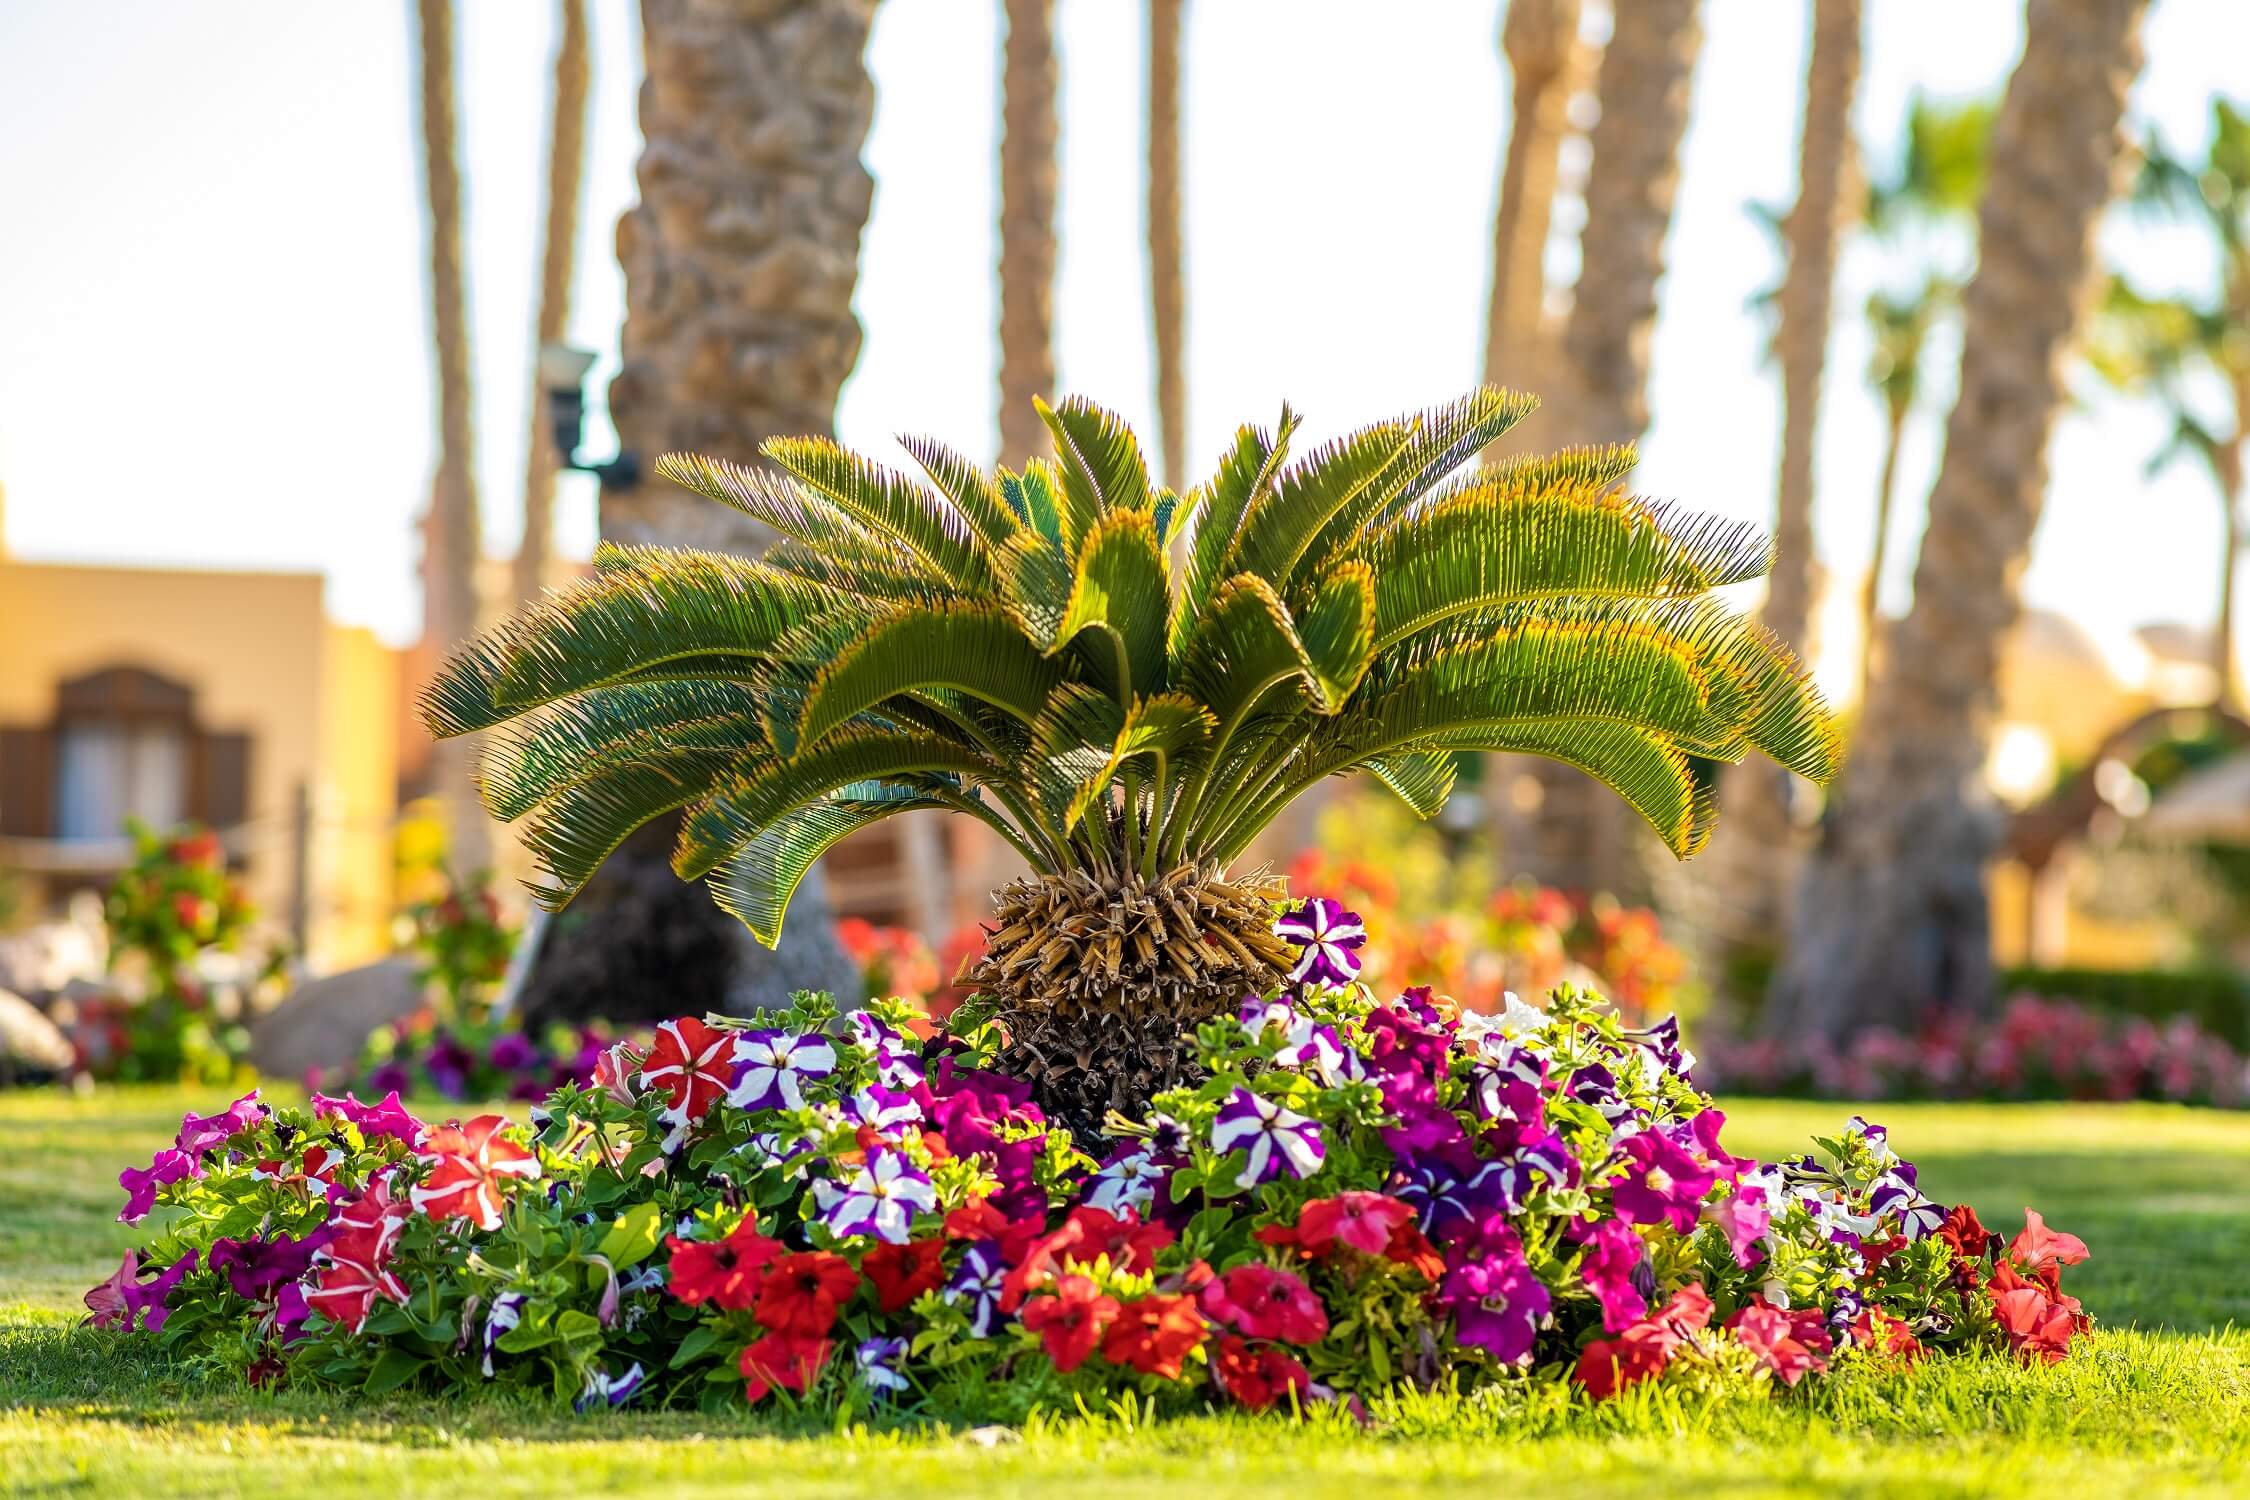 A small palm tree surrounded by colorful flowers.